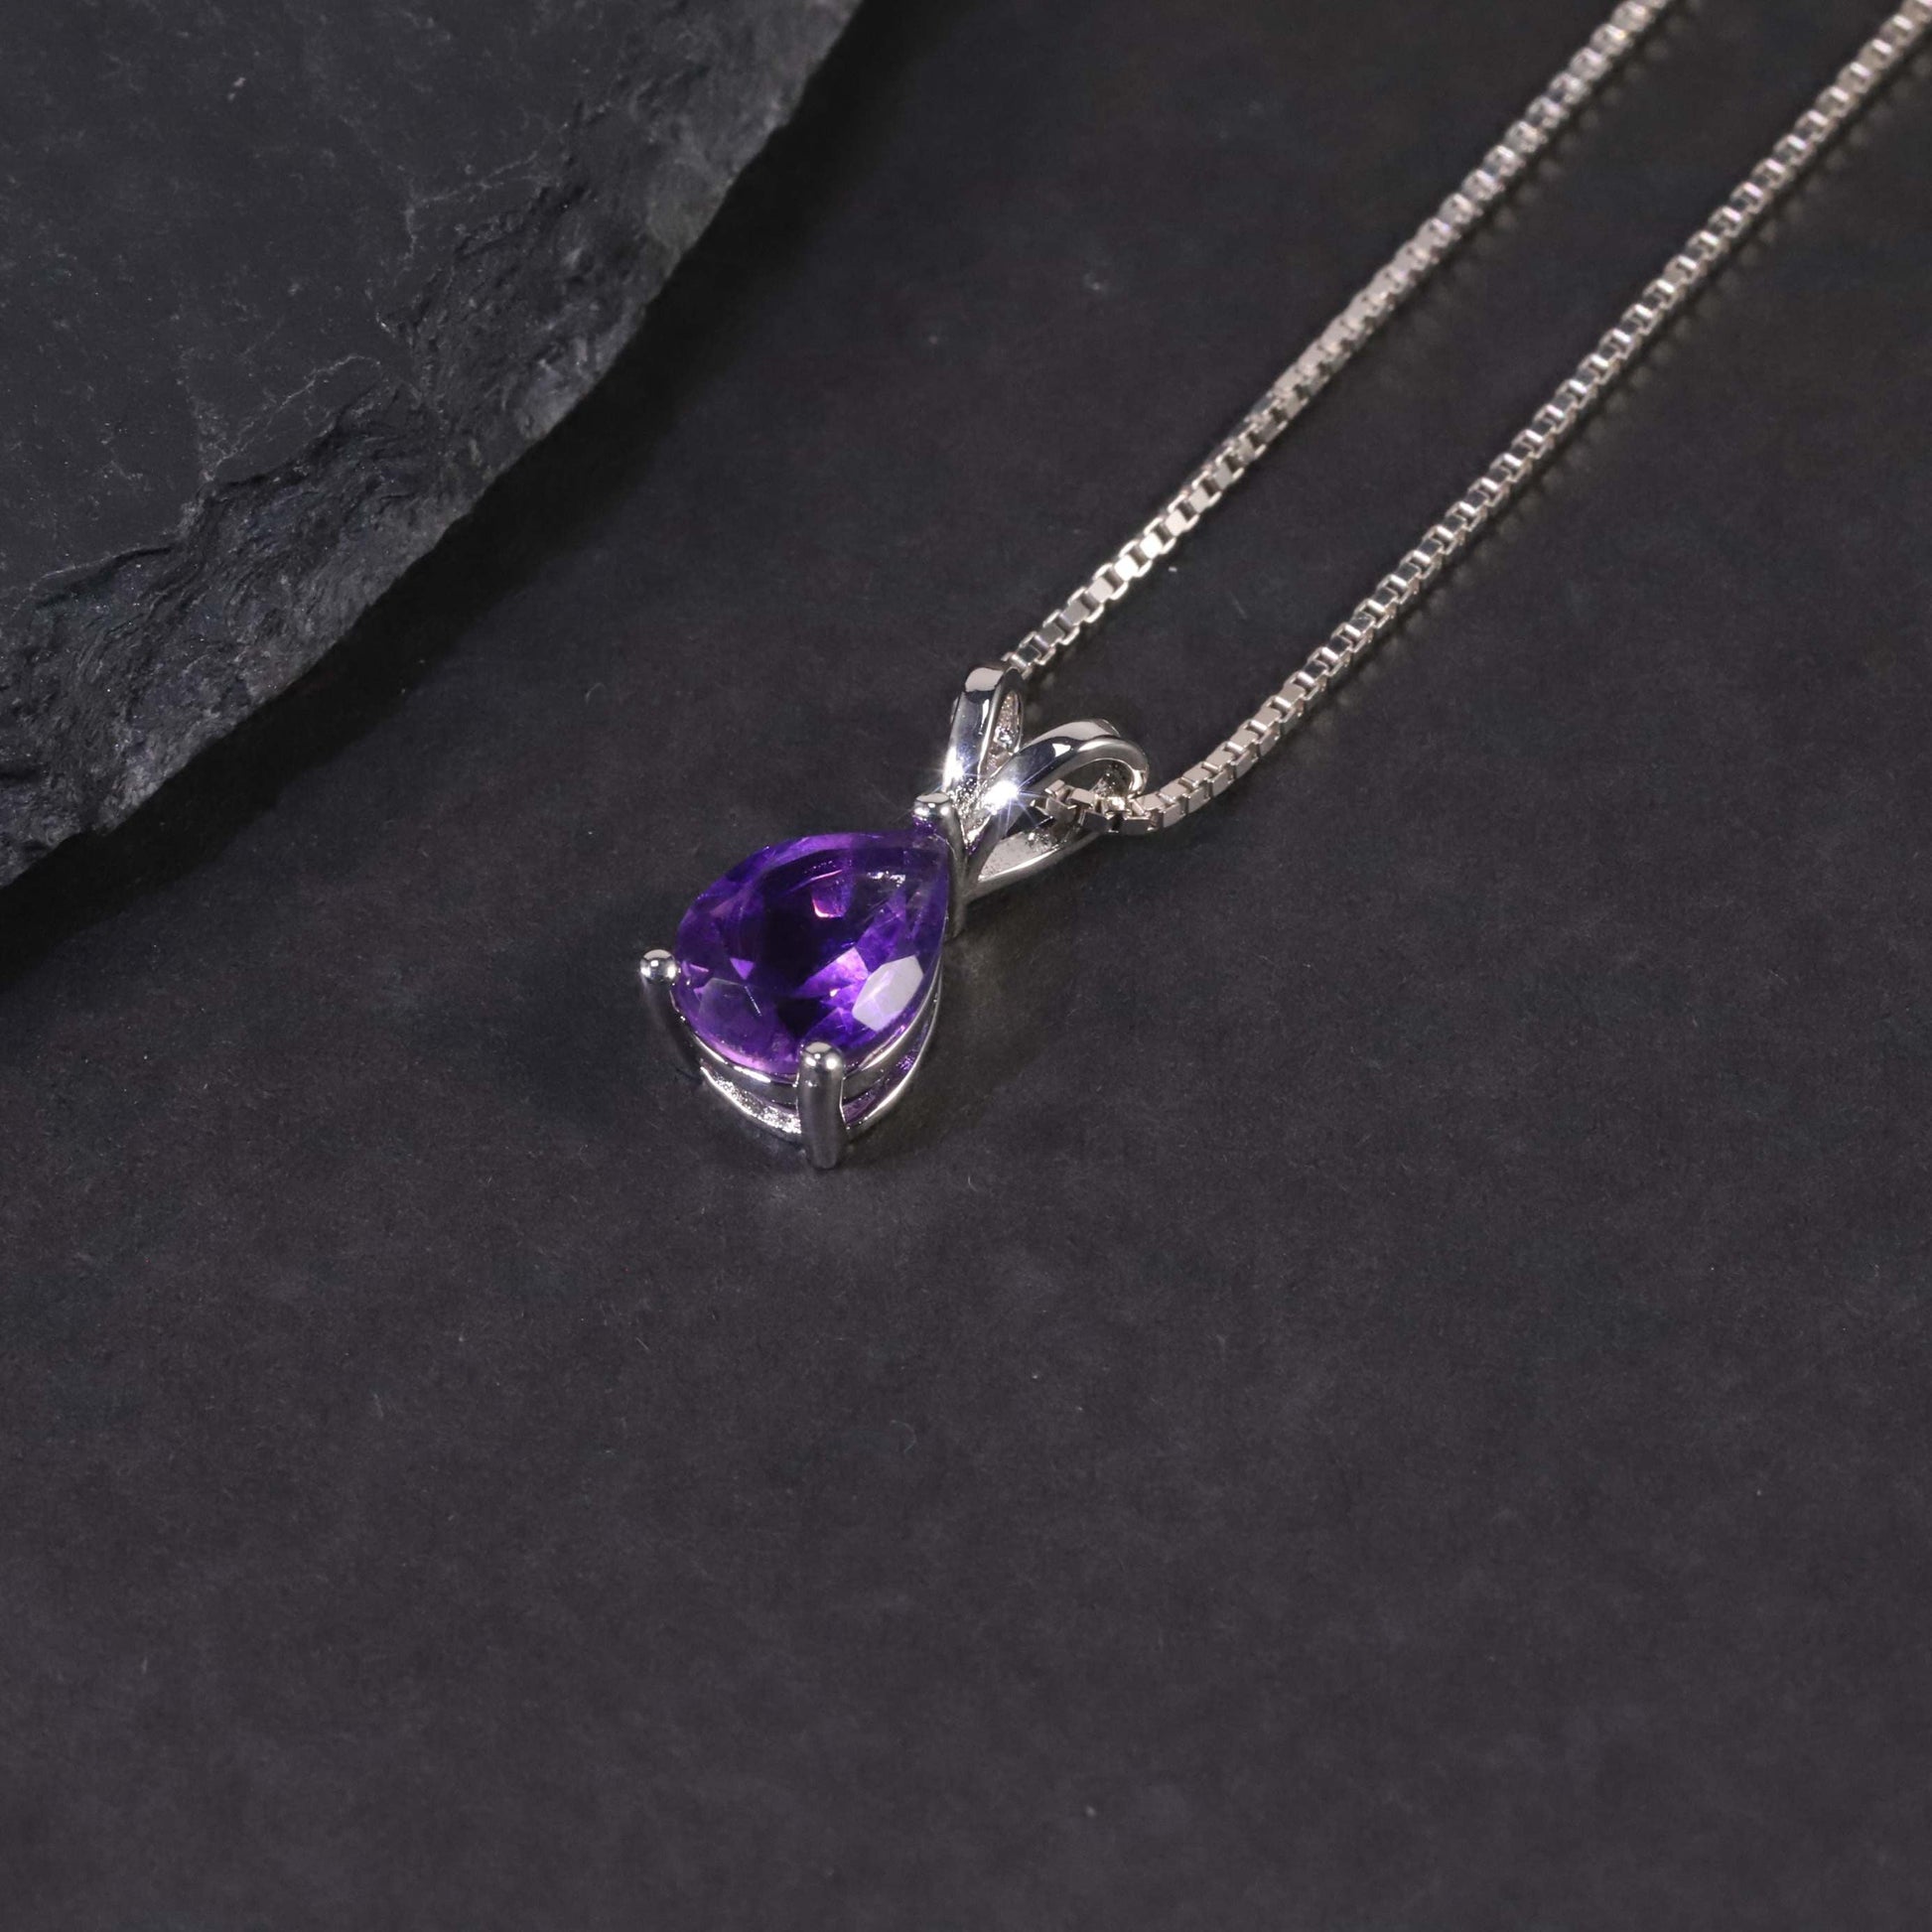 Side view of the Pear Amethyst Pendant against a dark background, highlighting its exquisite craftsmanship and intricate details.